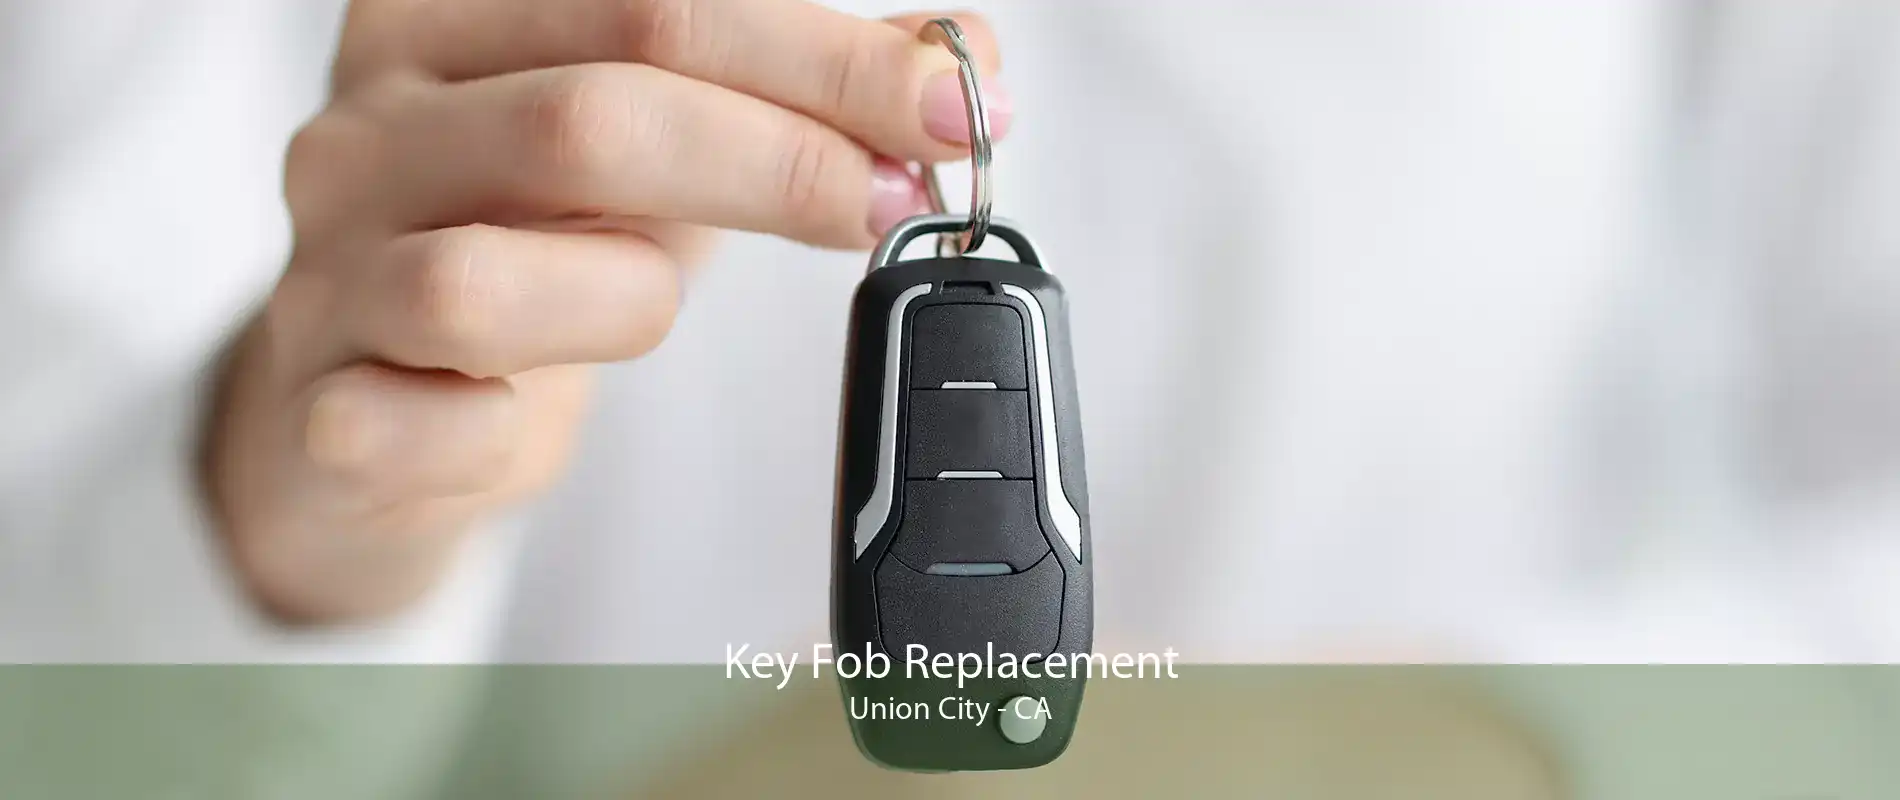 Key Fob Replacement Union City - CA